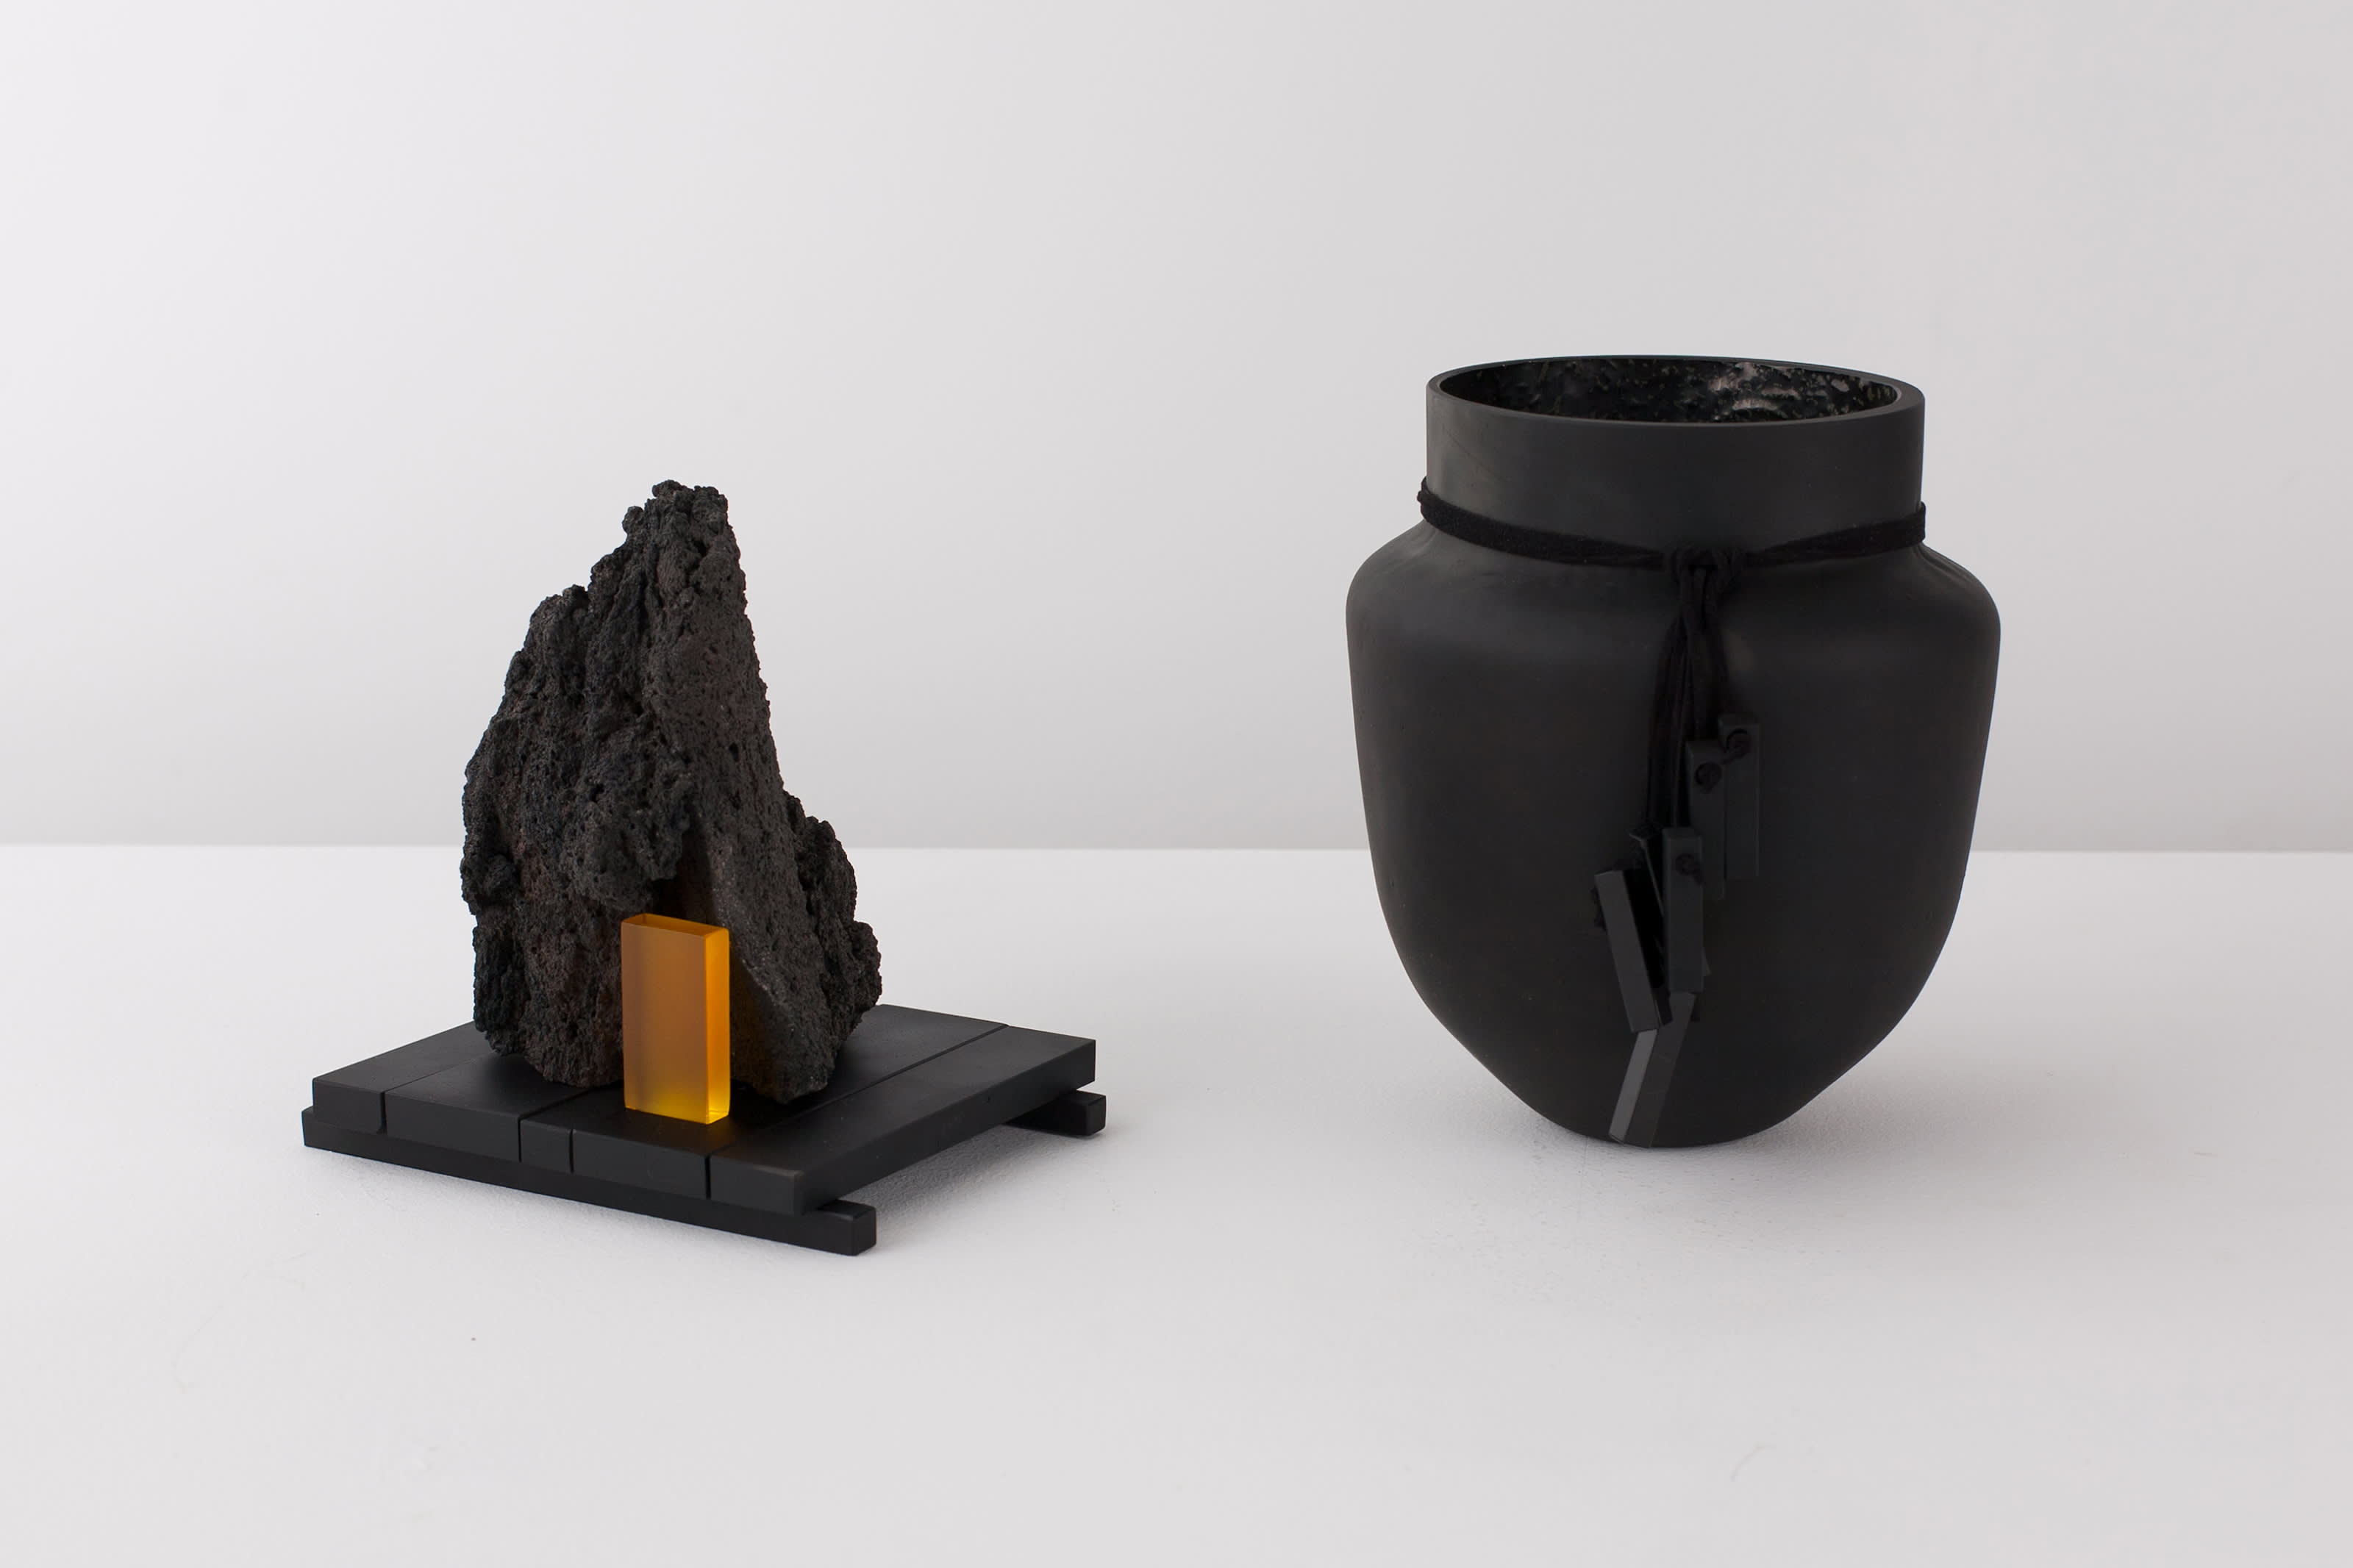 Vessel and sculptural works from the De Natura Fossilium series.